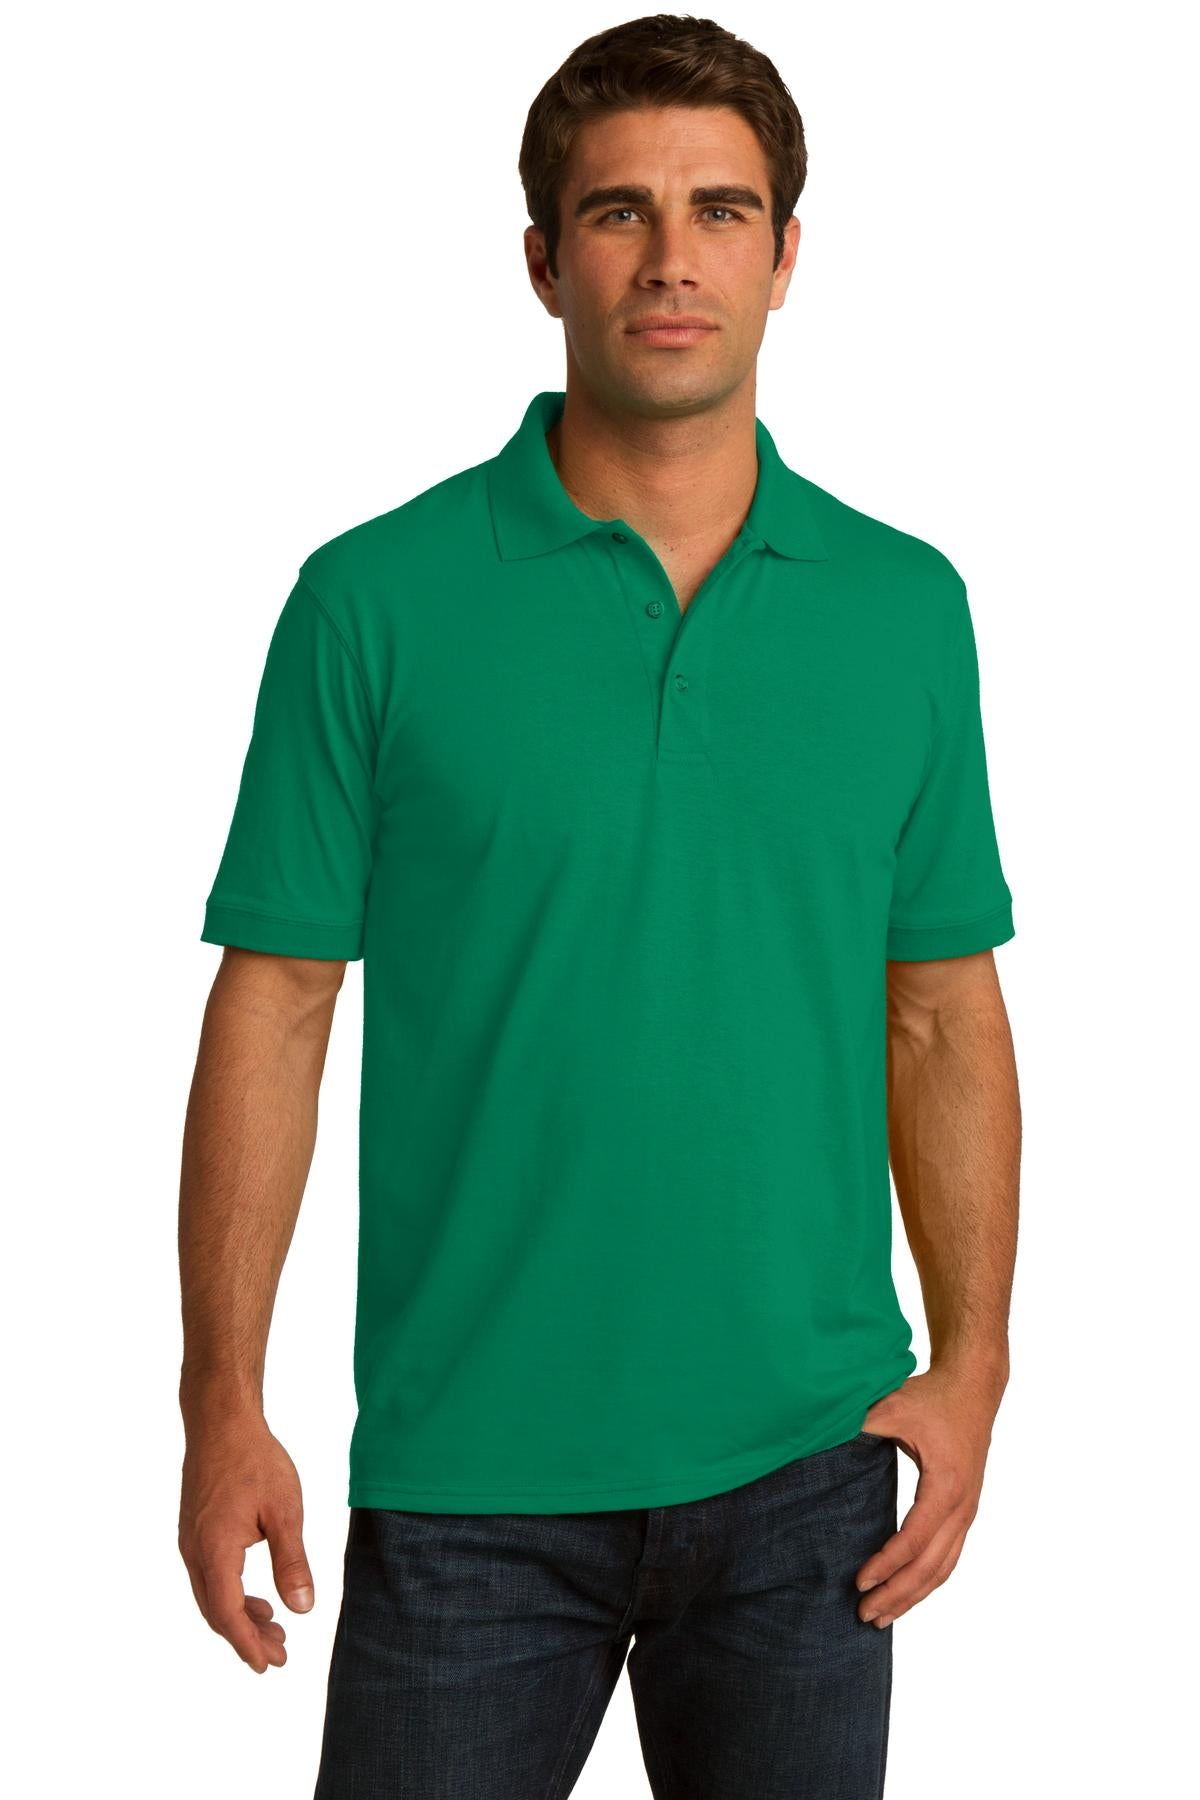 Port & Company Tall Core Blend Jersey Knit Polo. KP55T